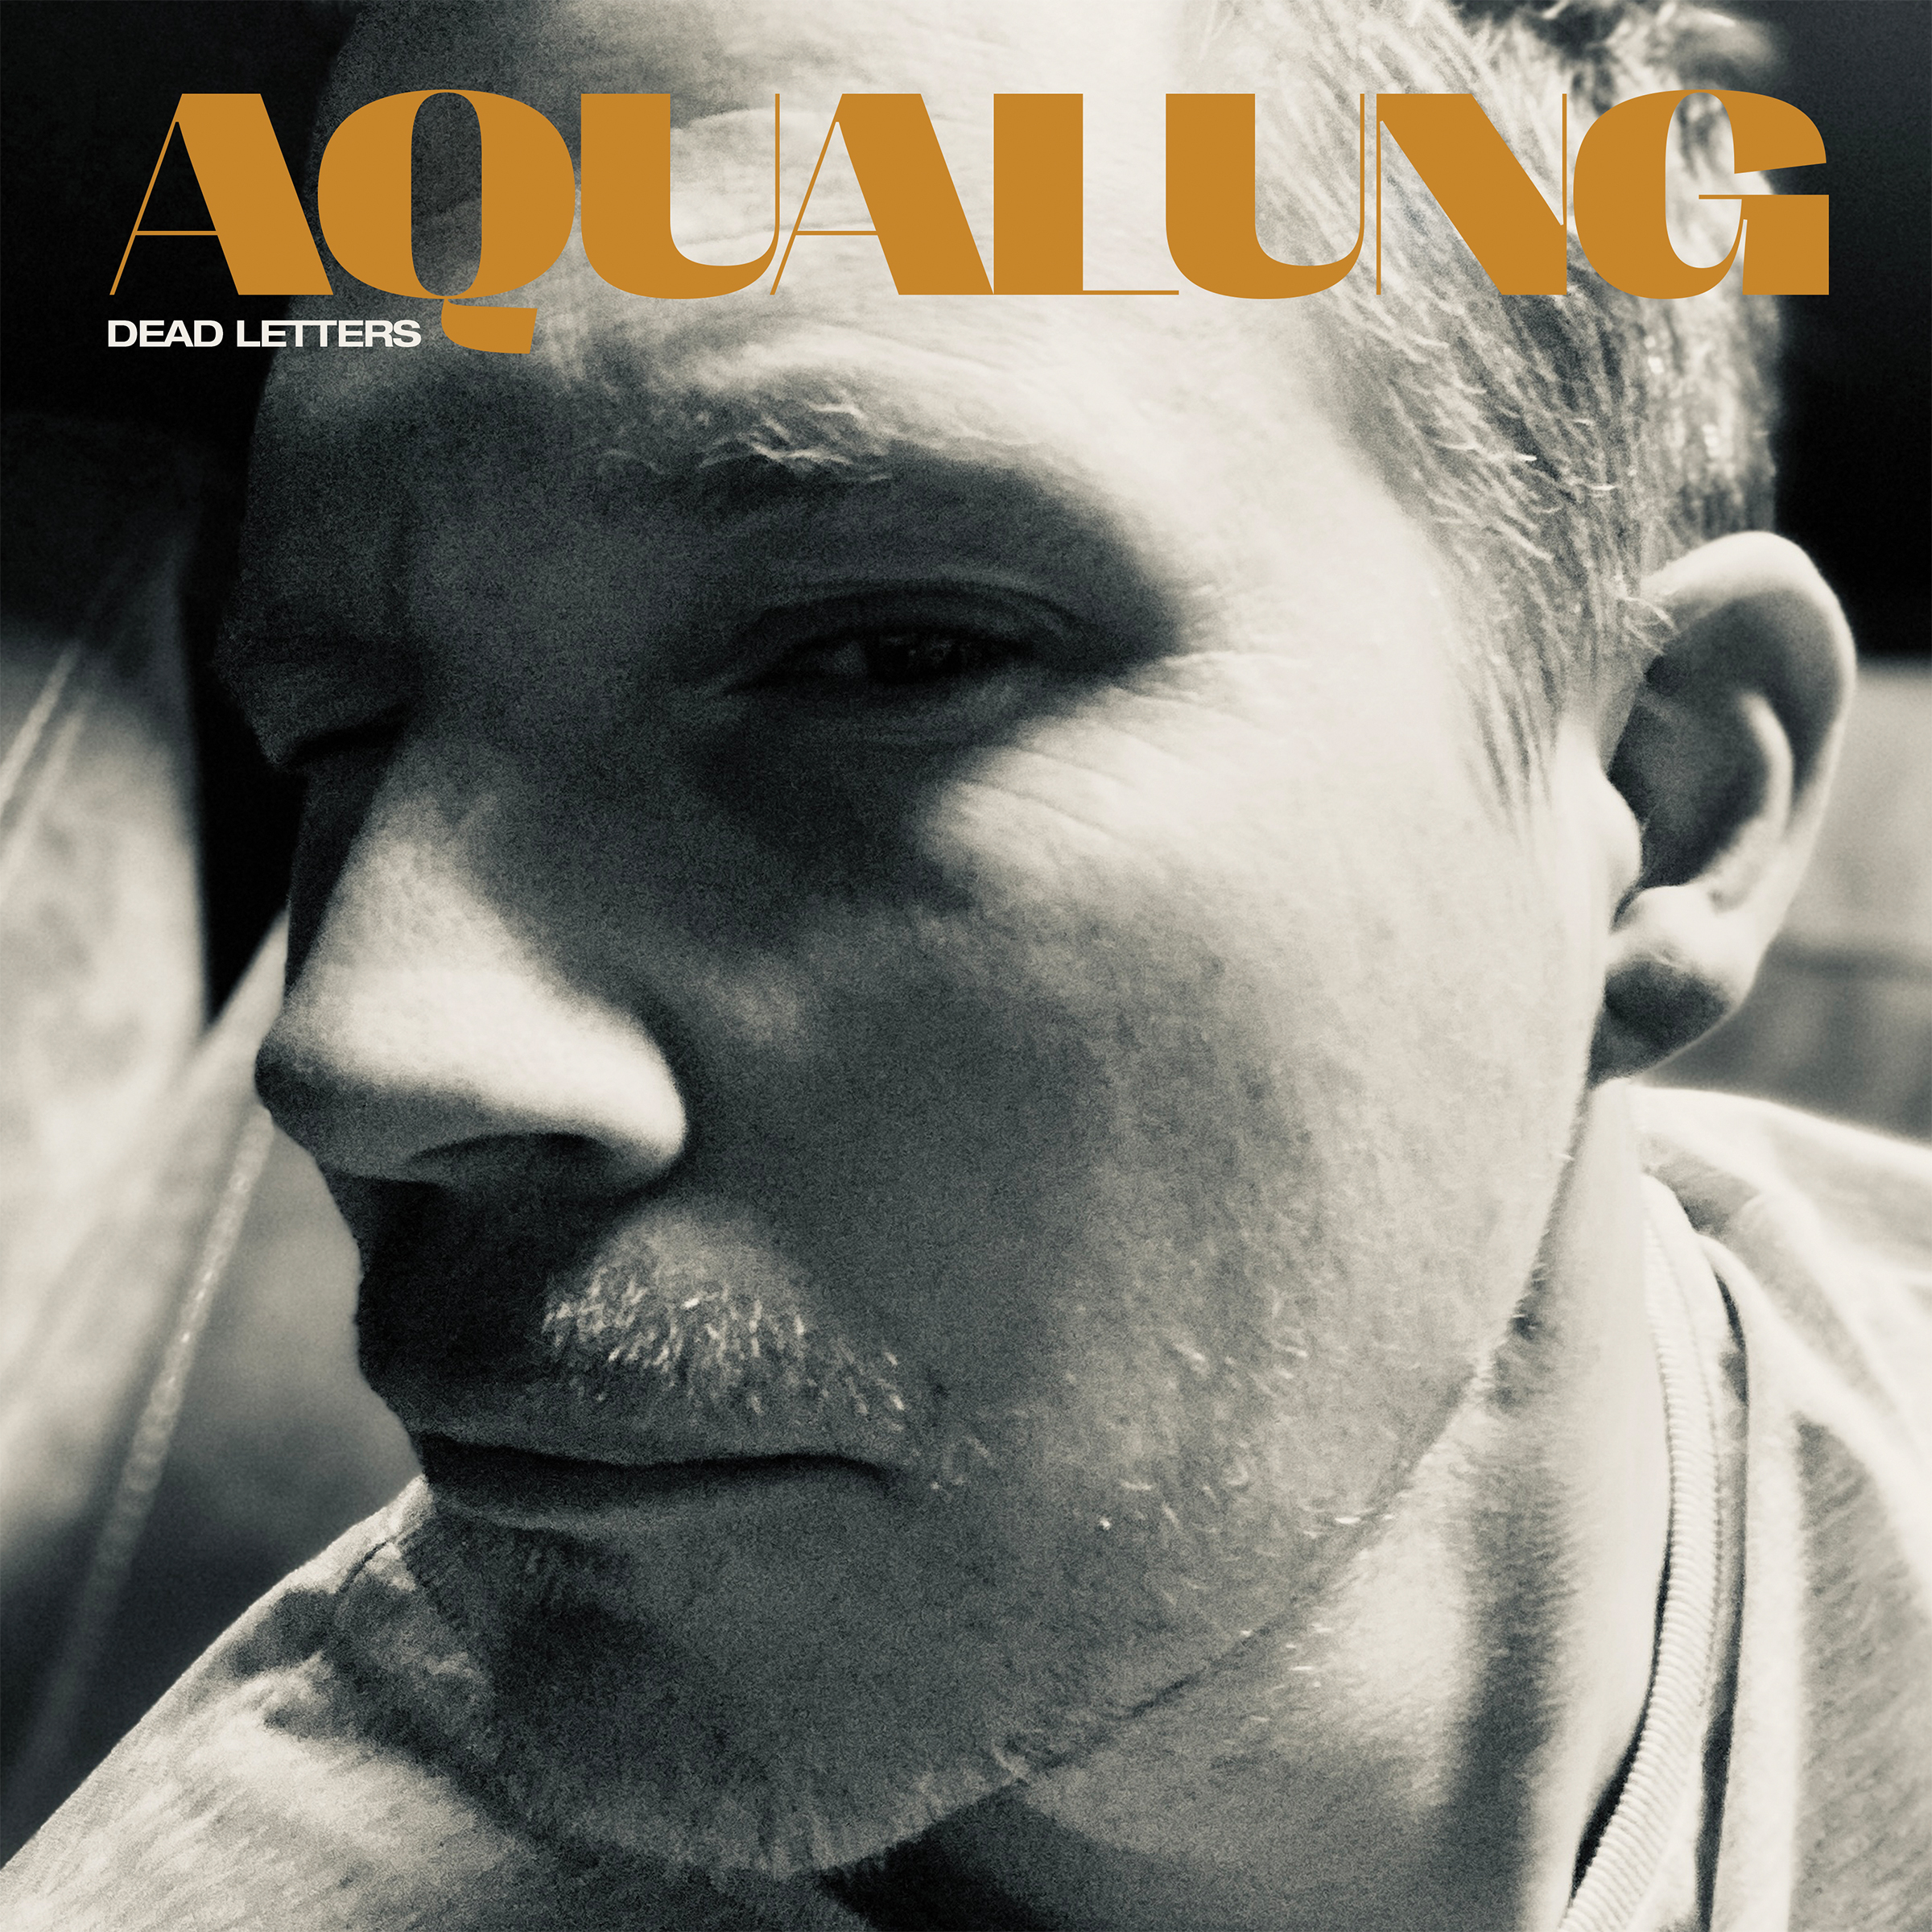 ⭐️ RECORD OF THE WEEK: AQUALUNG – DEAD LETTERS ⭐️